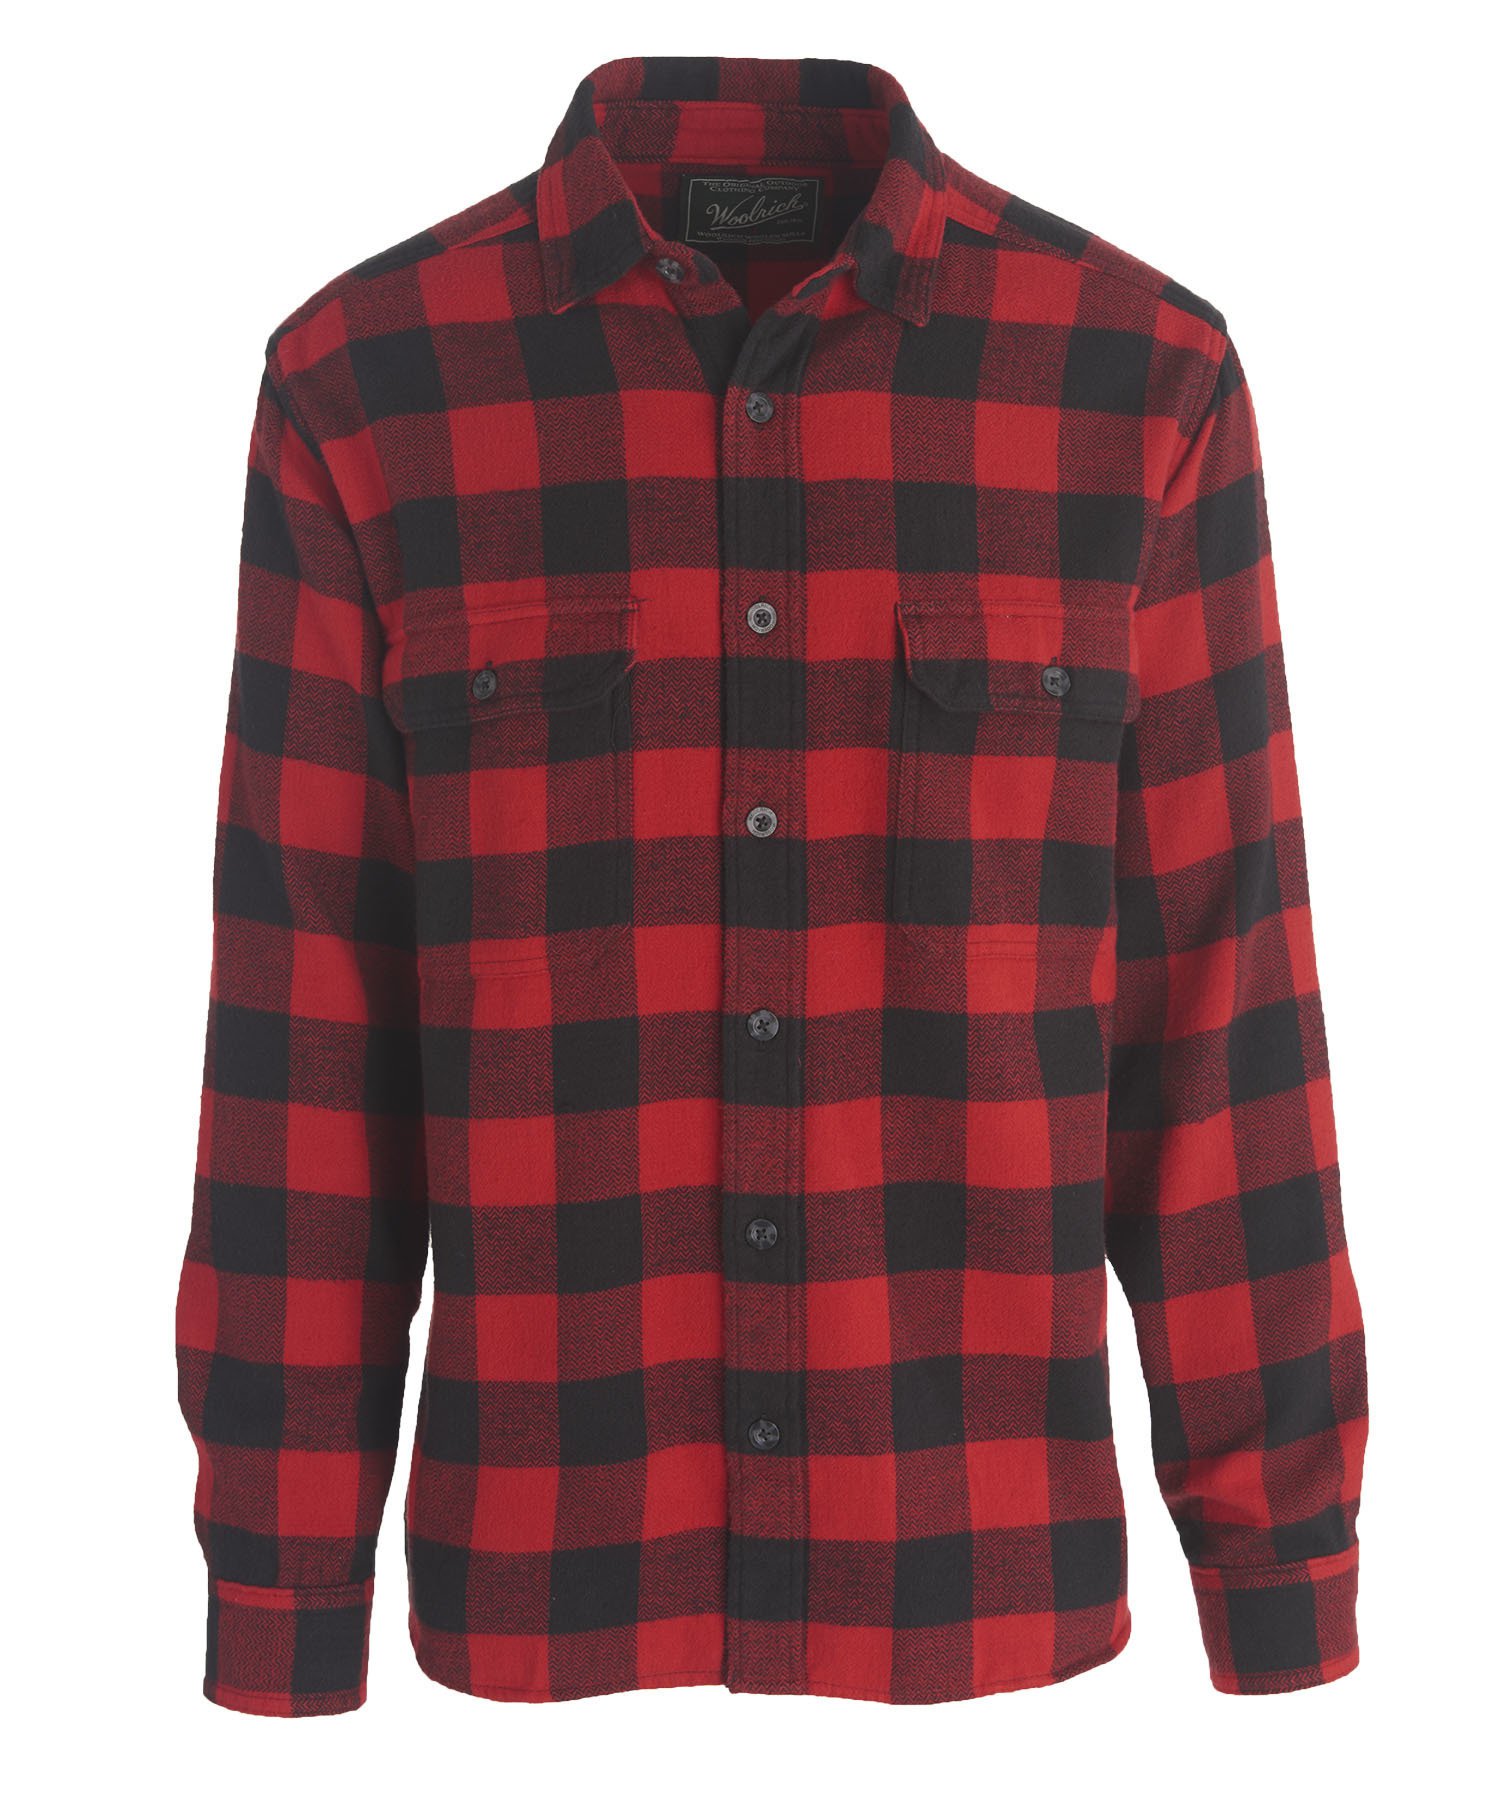 The Best Ways To Wear Mens Flannel Shirts